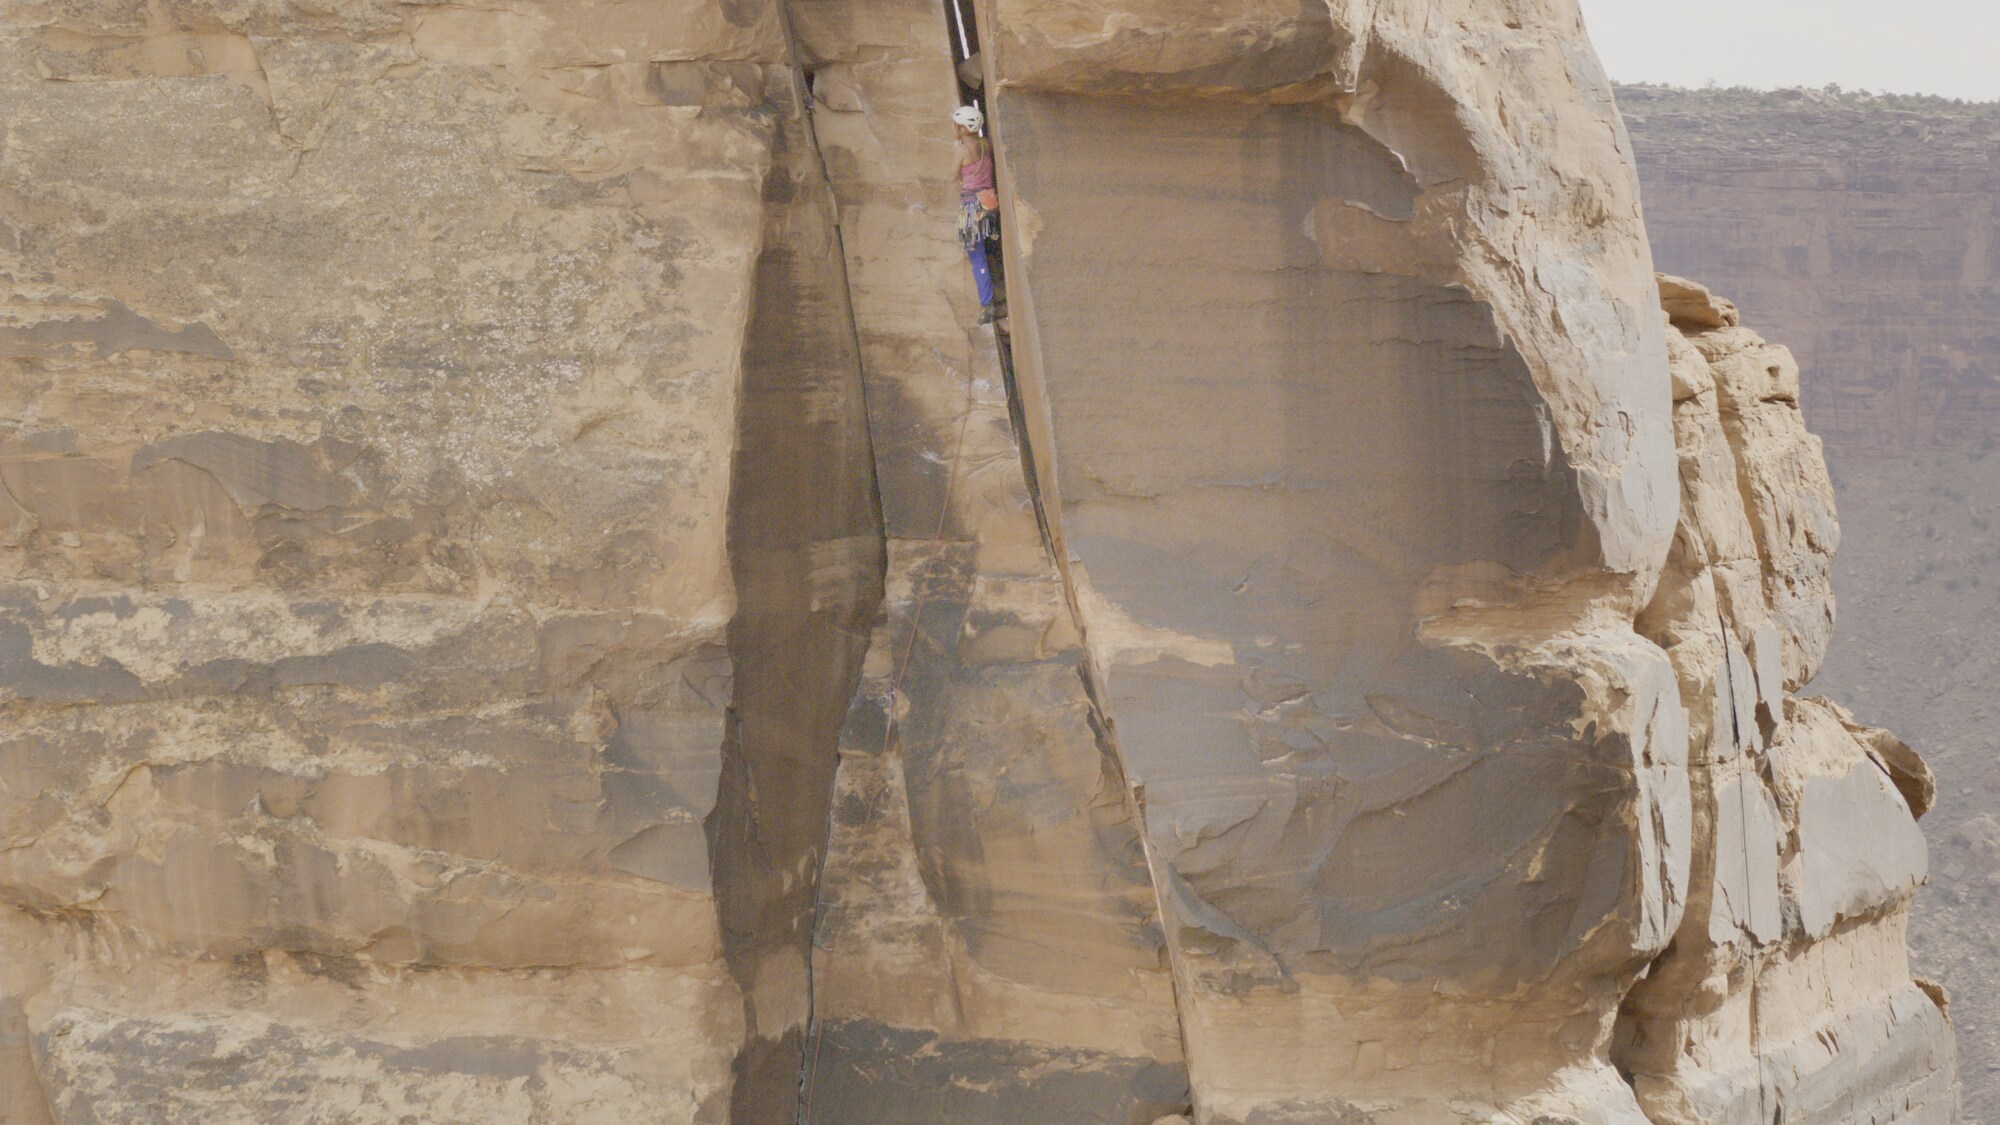 Faith Dickey climbs a rock formation. (National Geographic for Disney+)